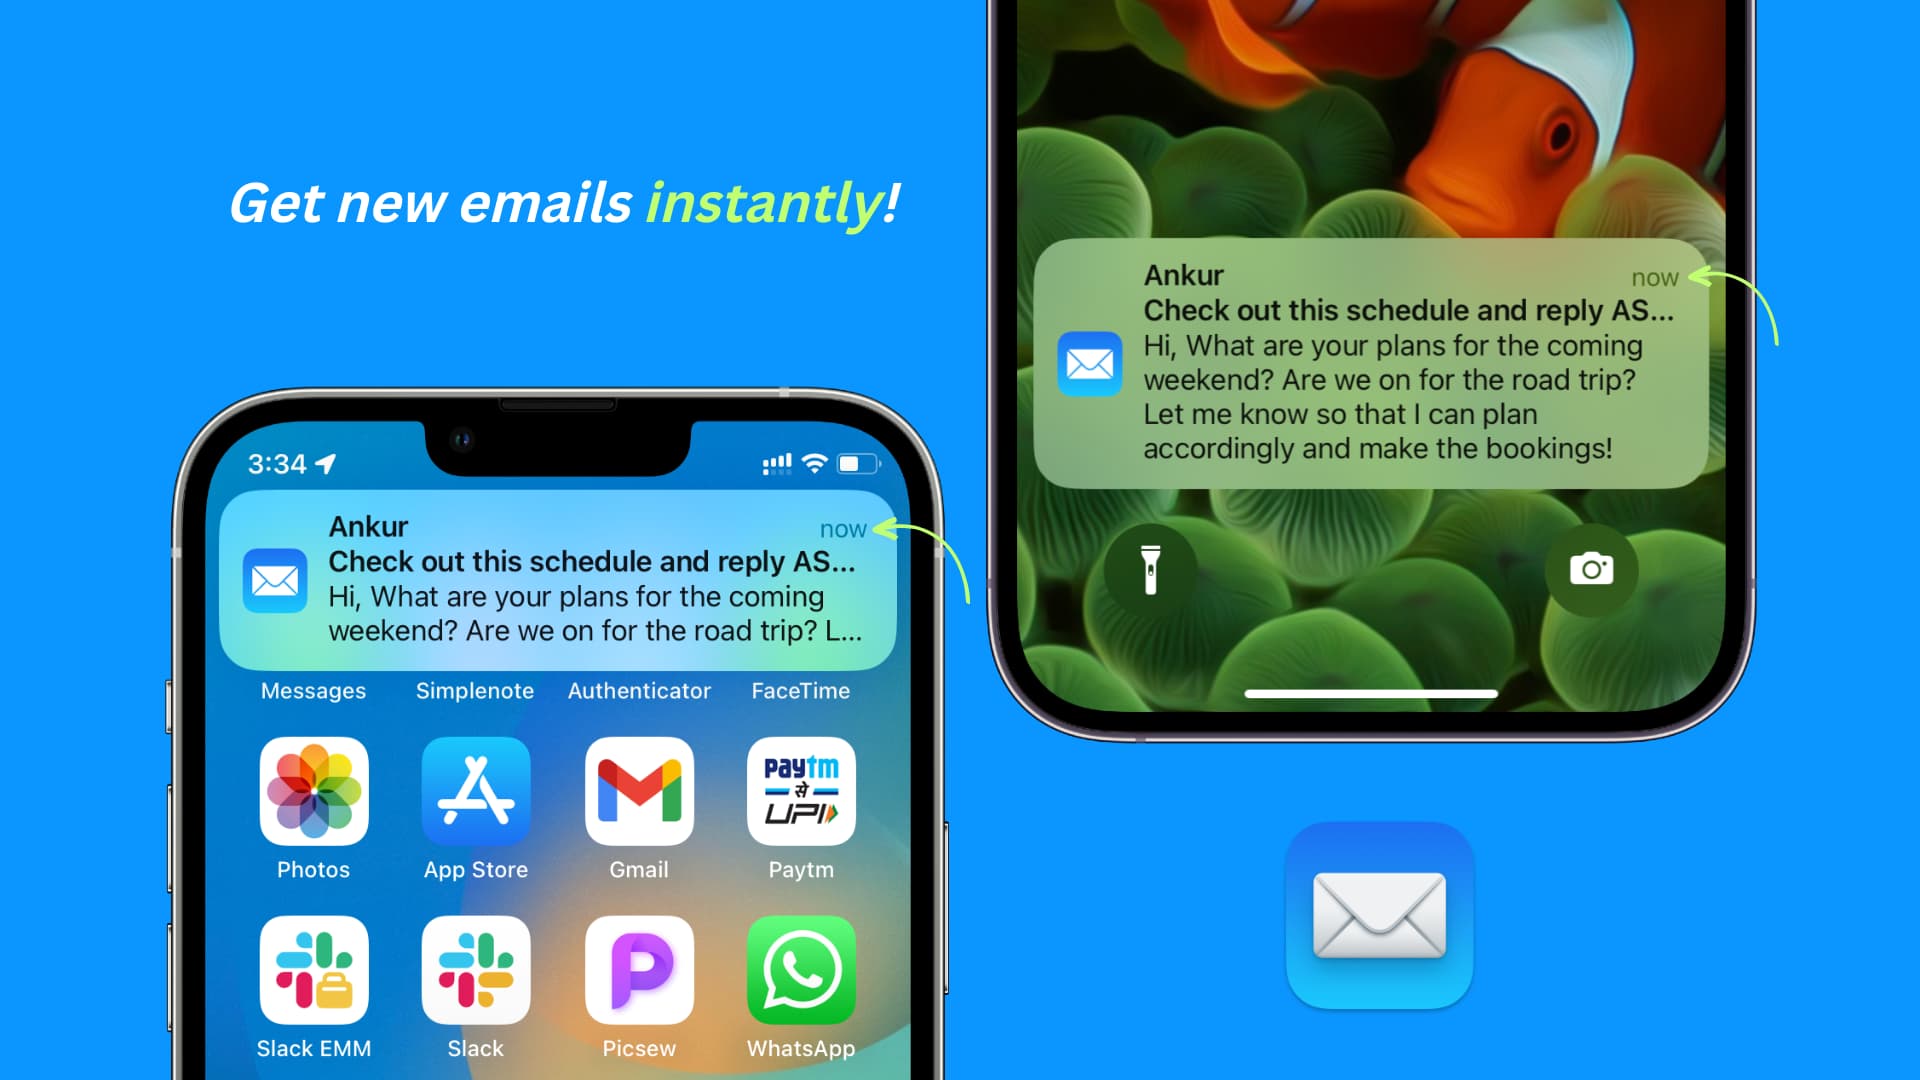 Getting delayed or no Mail app notifications on iPhone? Here’s how to fix it